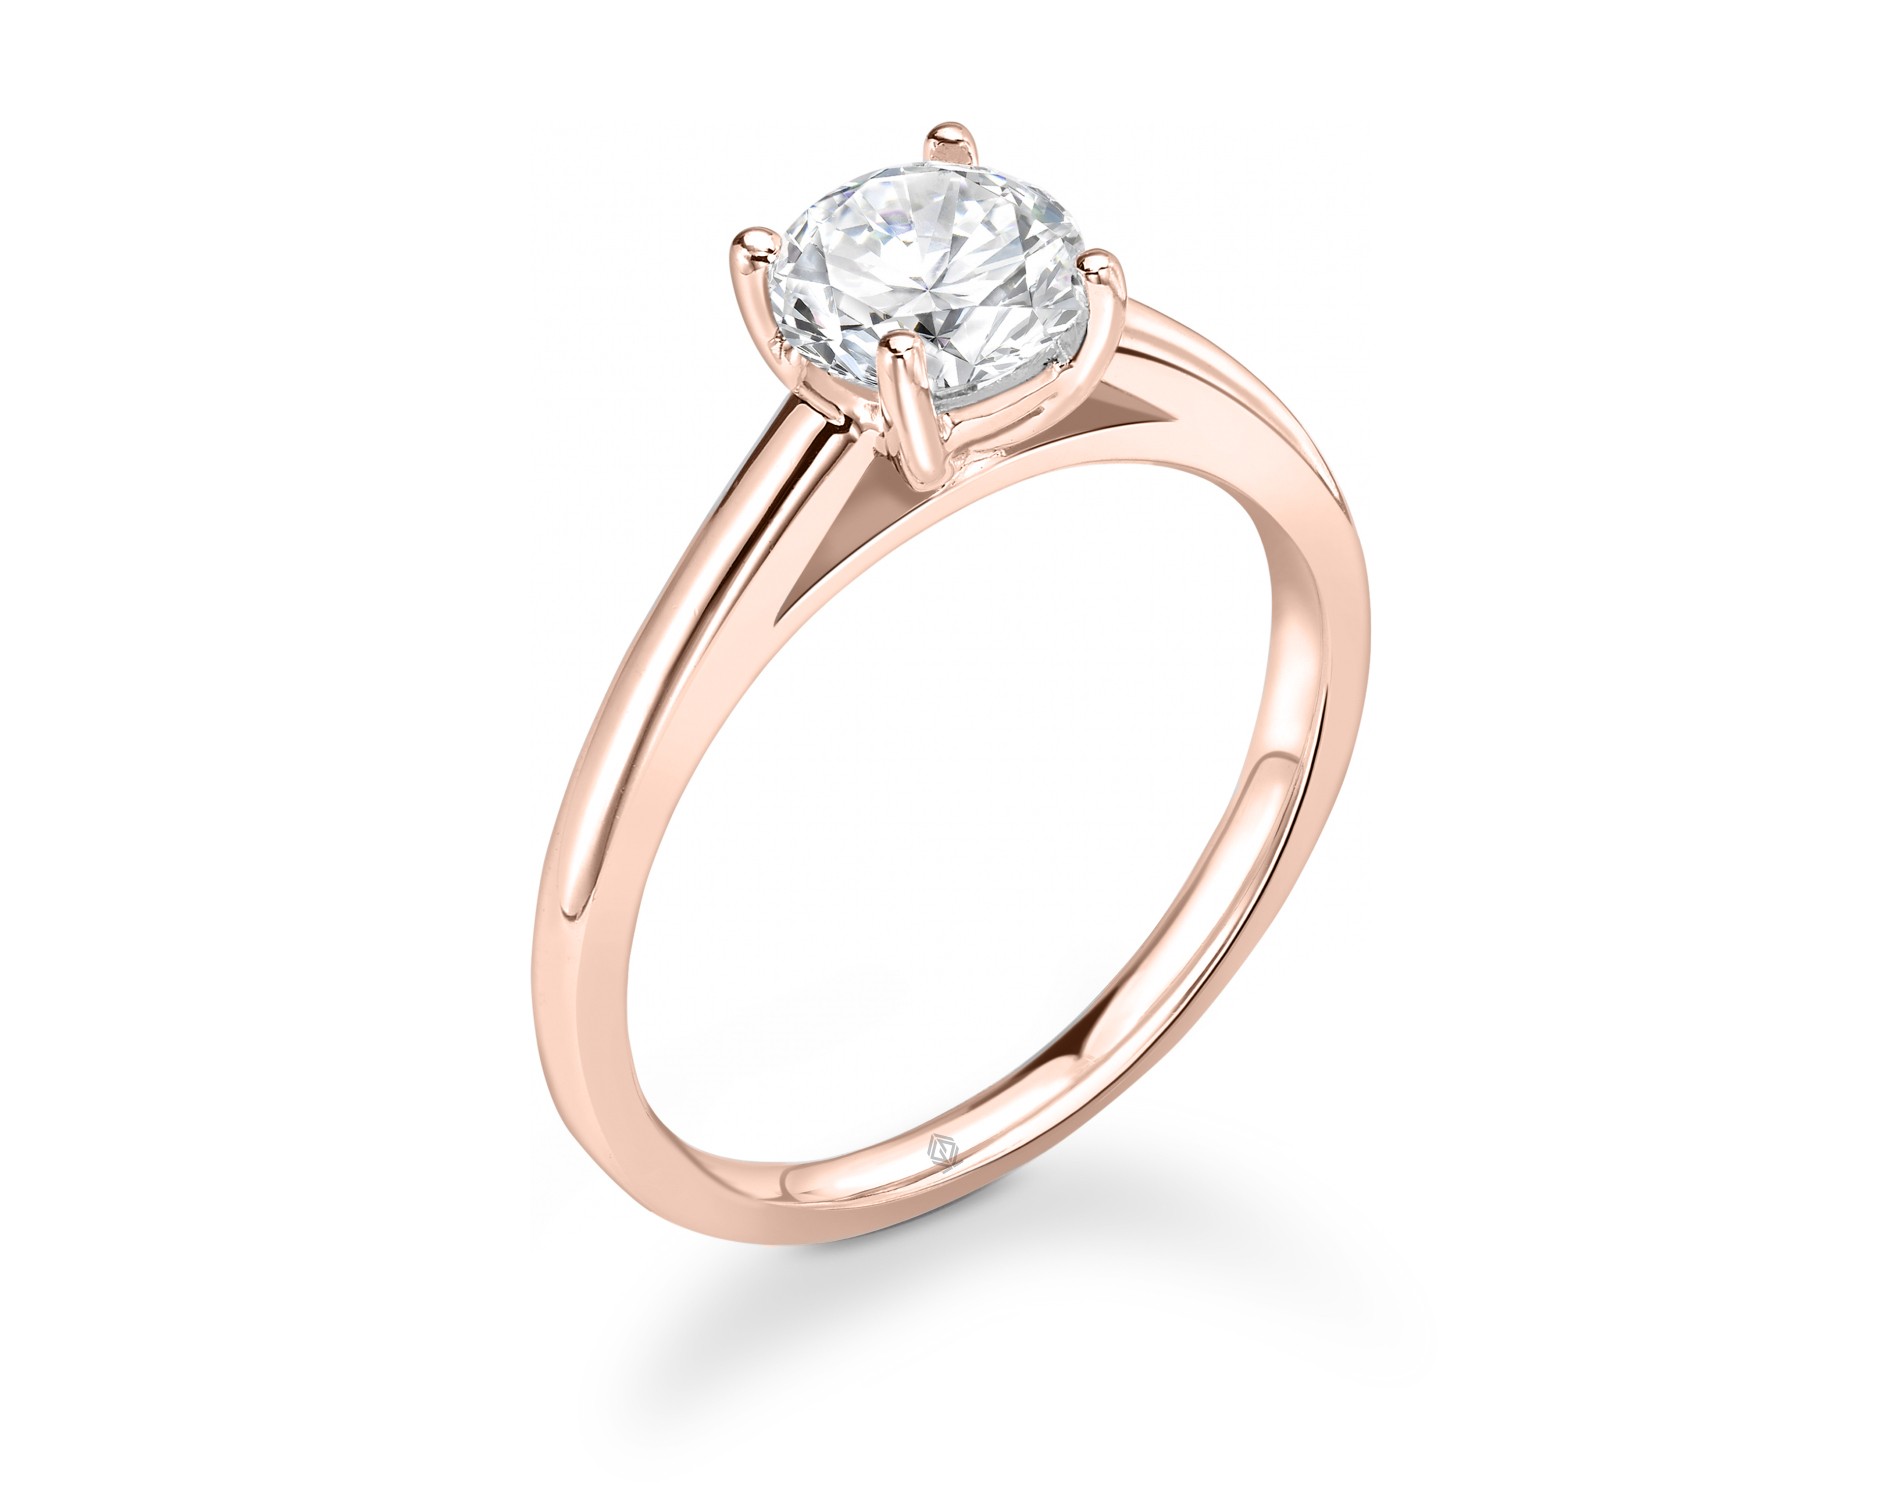 18K ROSE GOLD 4 PRONGS SOLITAIRE ROUND CUT DIAMOND ENGAGEMENT RING